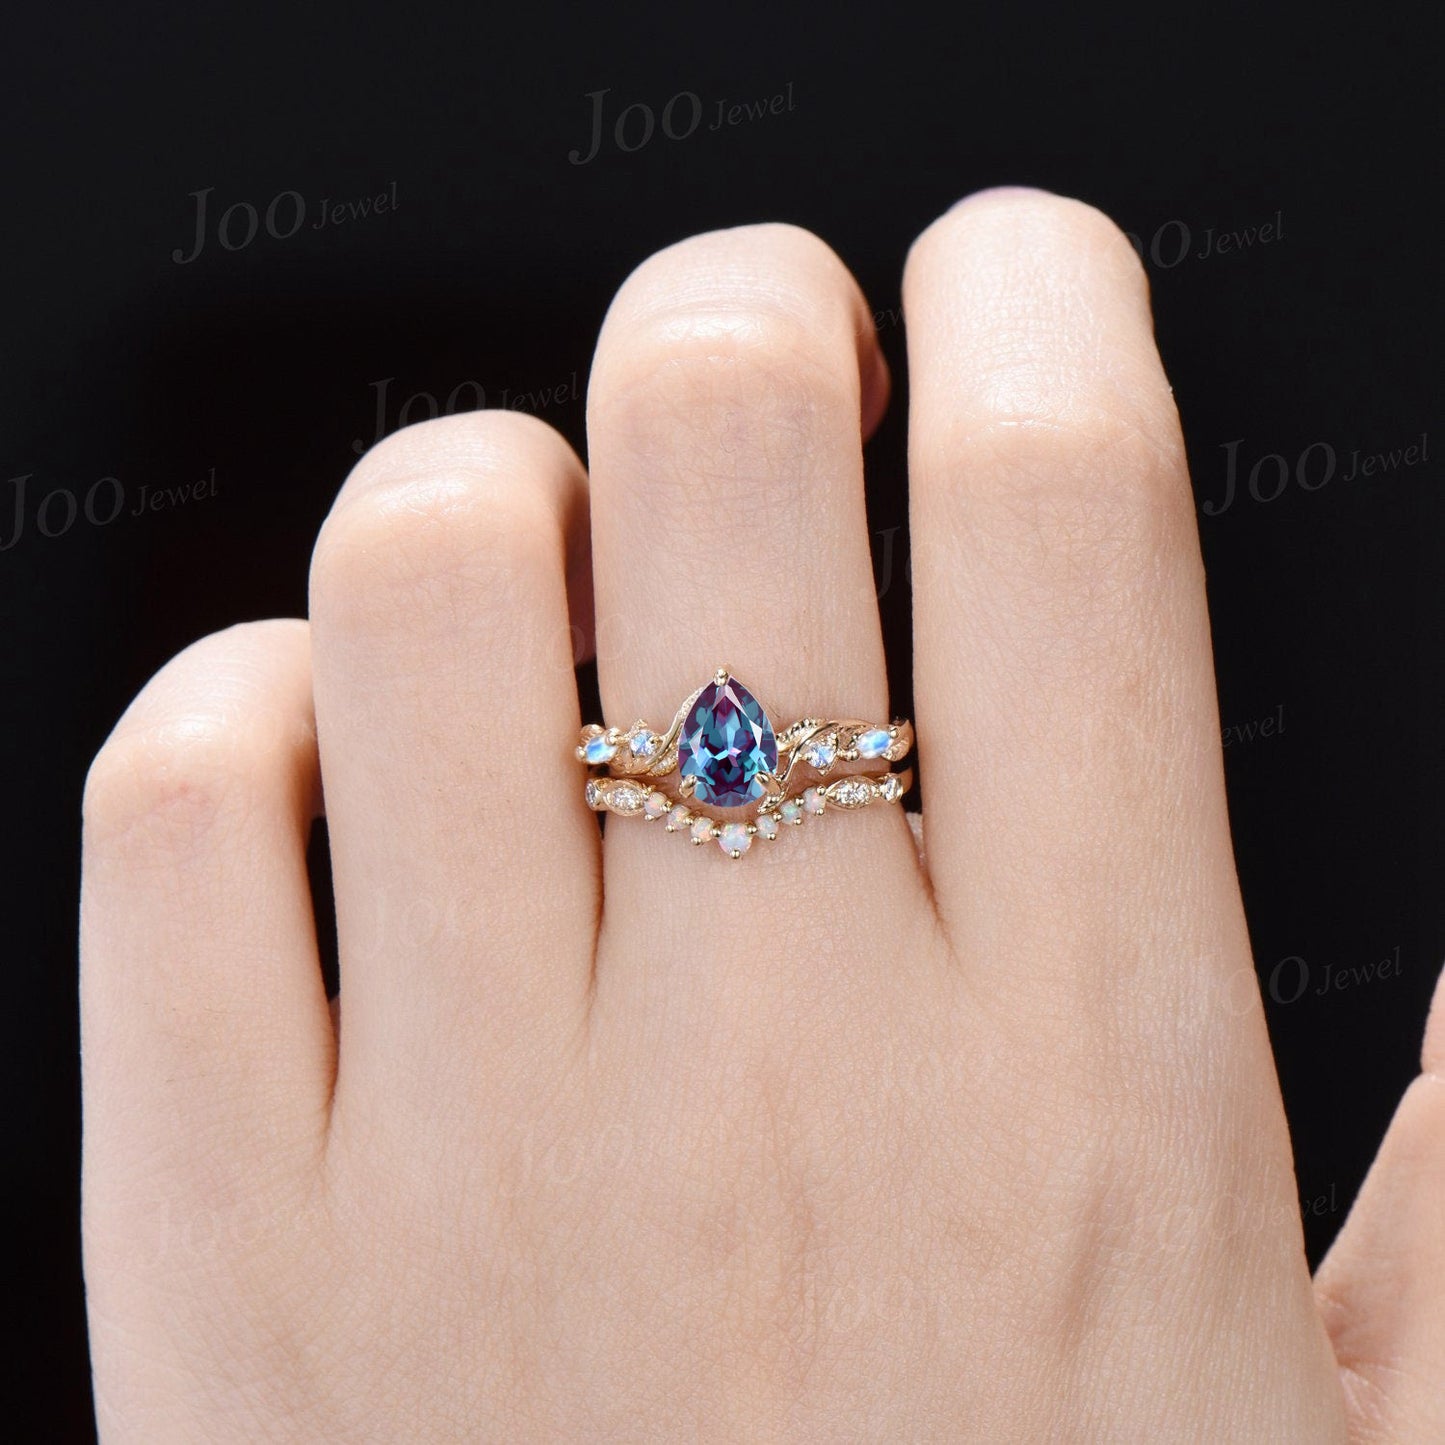 Twig Vine Color-Change Alexandrite Moonstone Ring Set 10K Gold 1.25ct Nature Inspired Pear Alexandrite Engagement Rings Opal Wedding Band